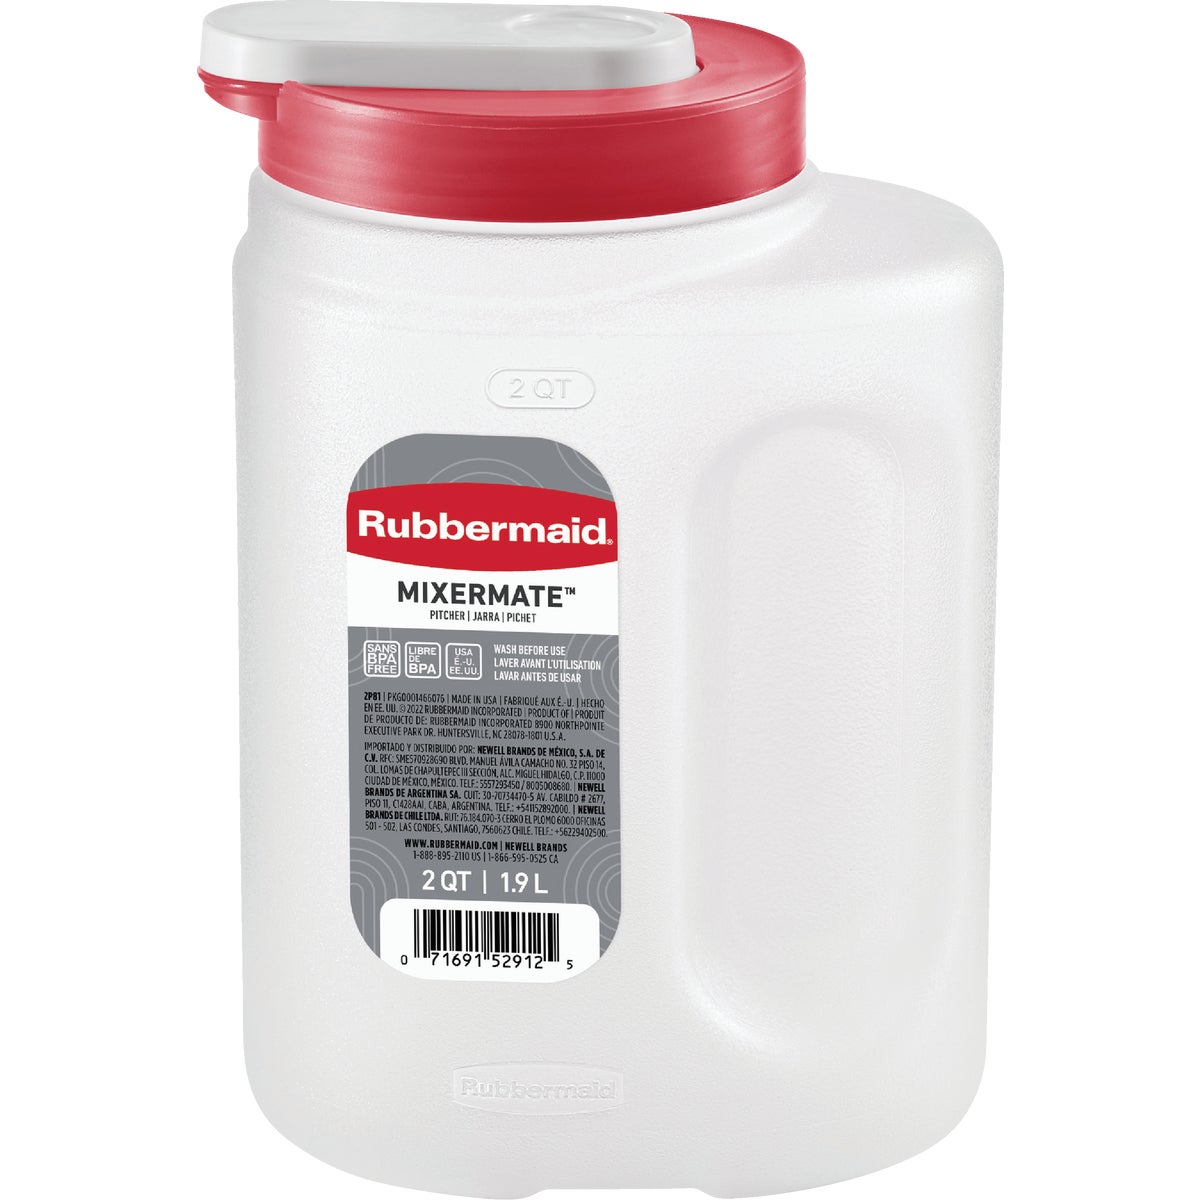 Item 614892, Mix, shake, store, and serve with the Rubbermaid MixerMate Pitcher.